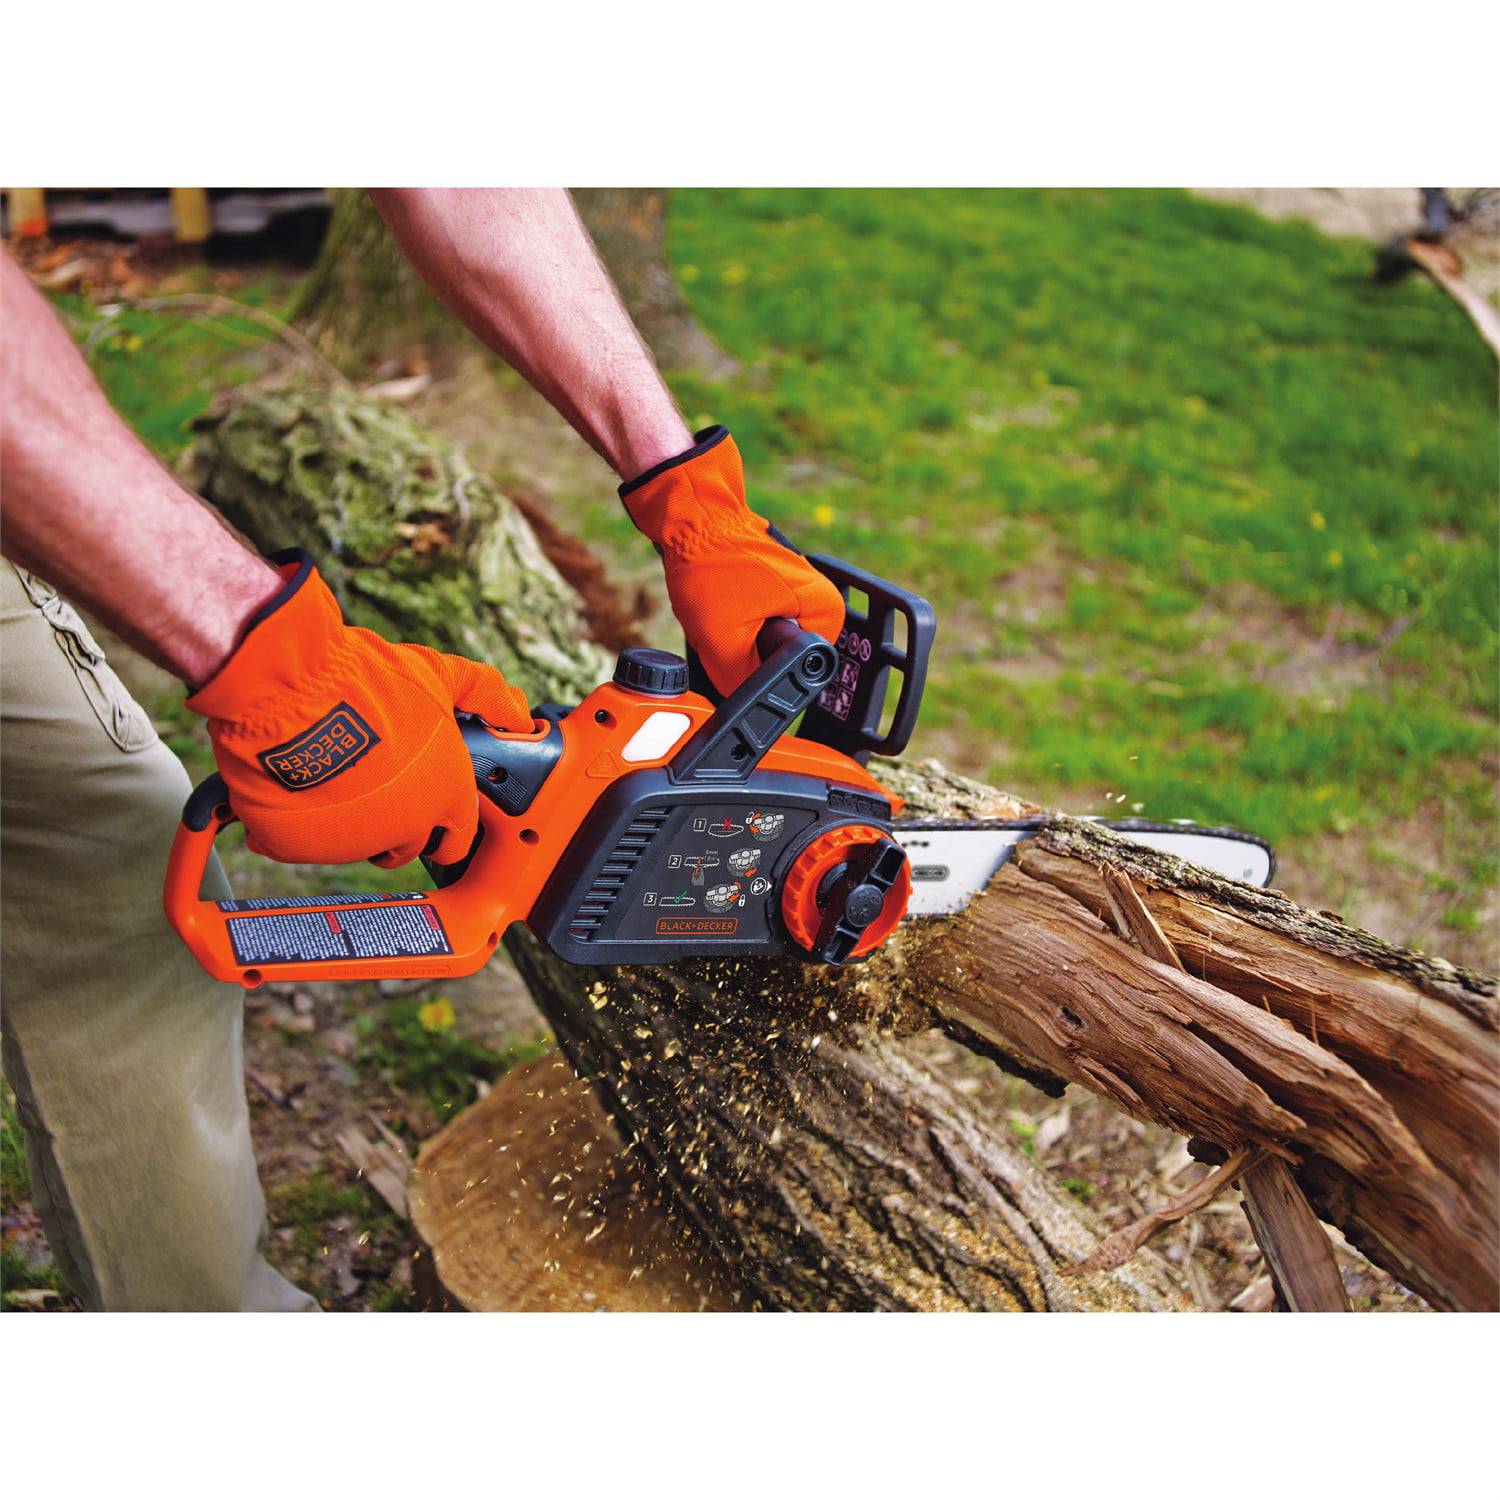 BLACK + DECKER 20V MAX Cordless Chainsaw 10 Inch for Sale in